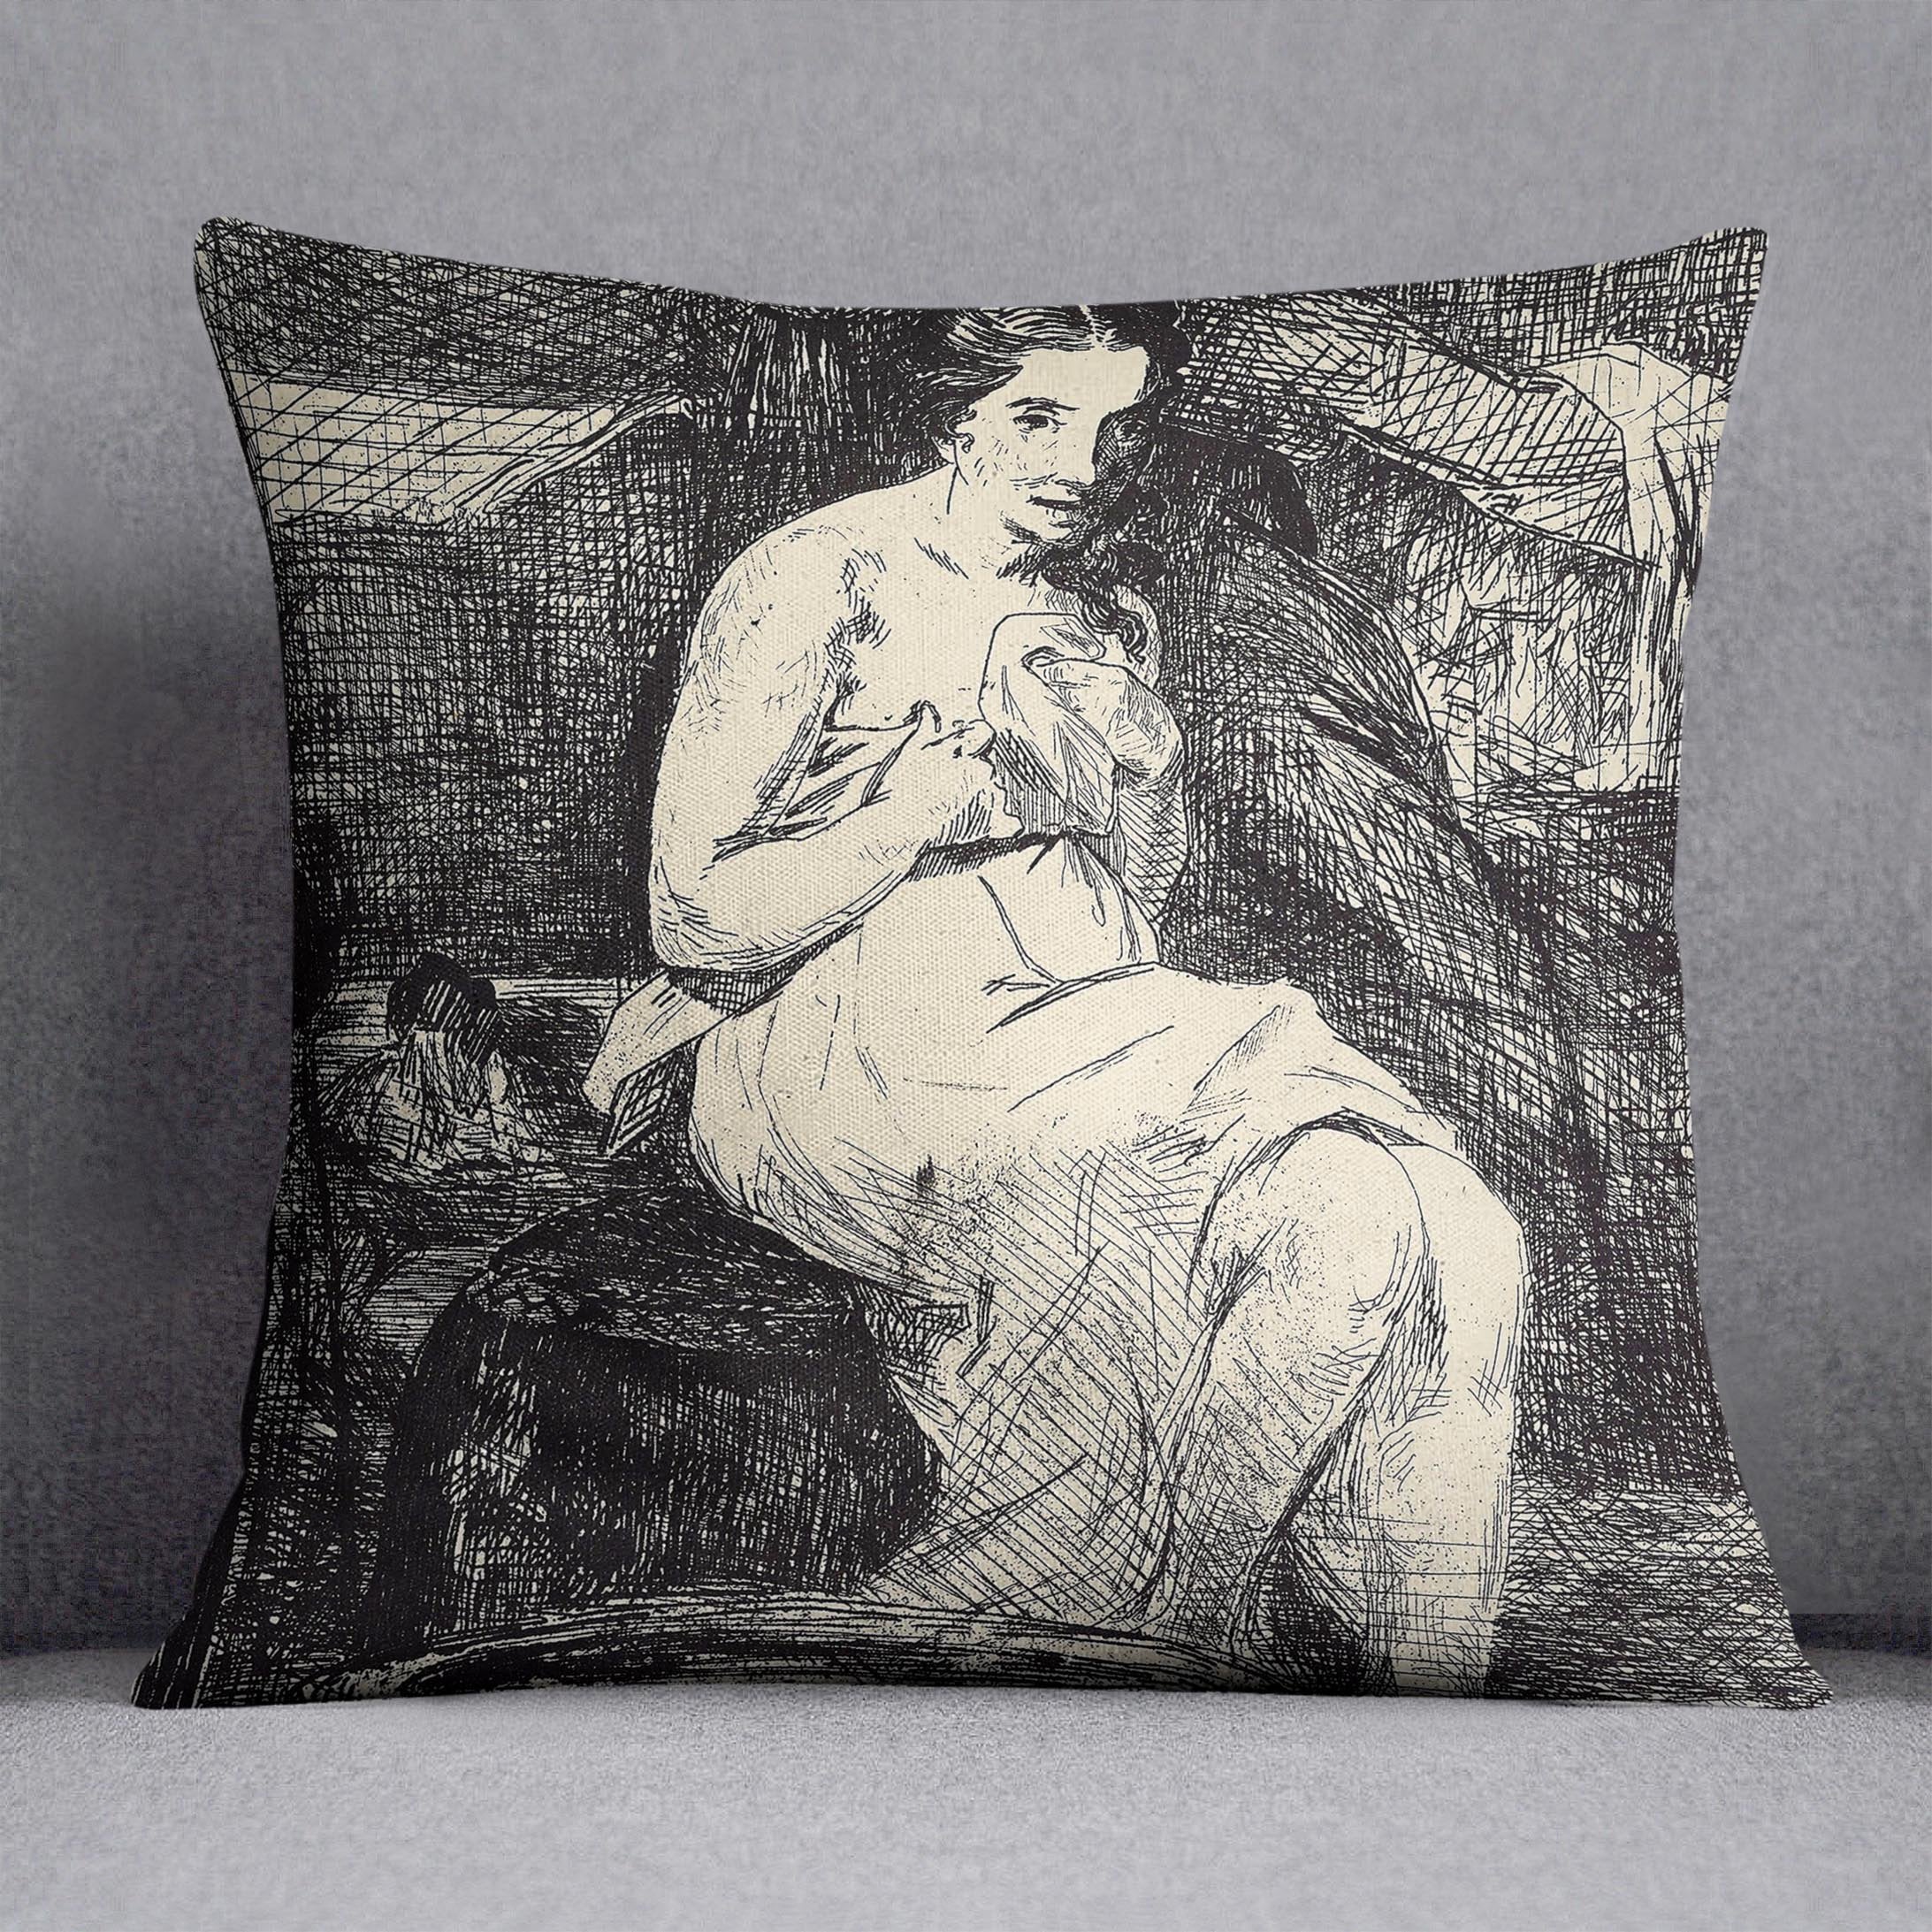 The Toillette by Manet Throw Pillow